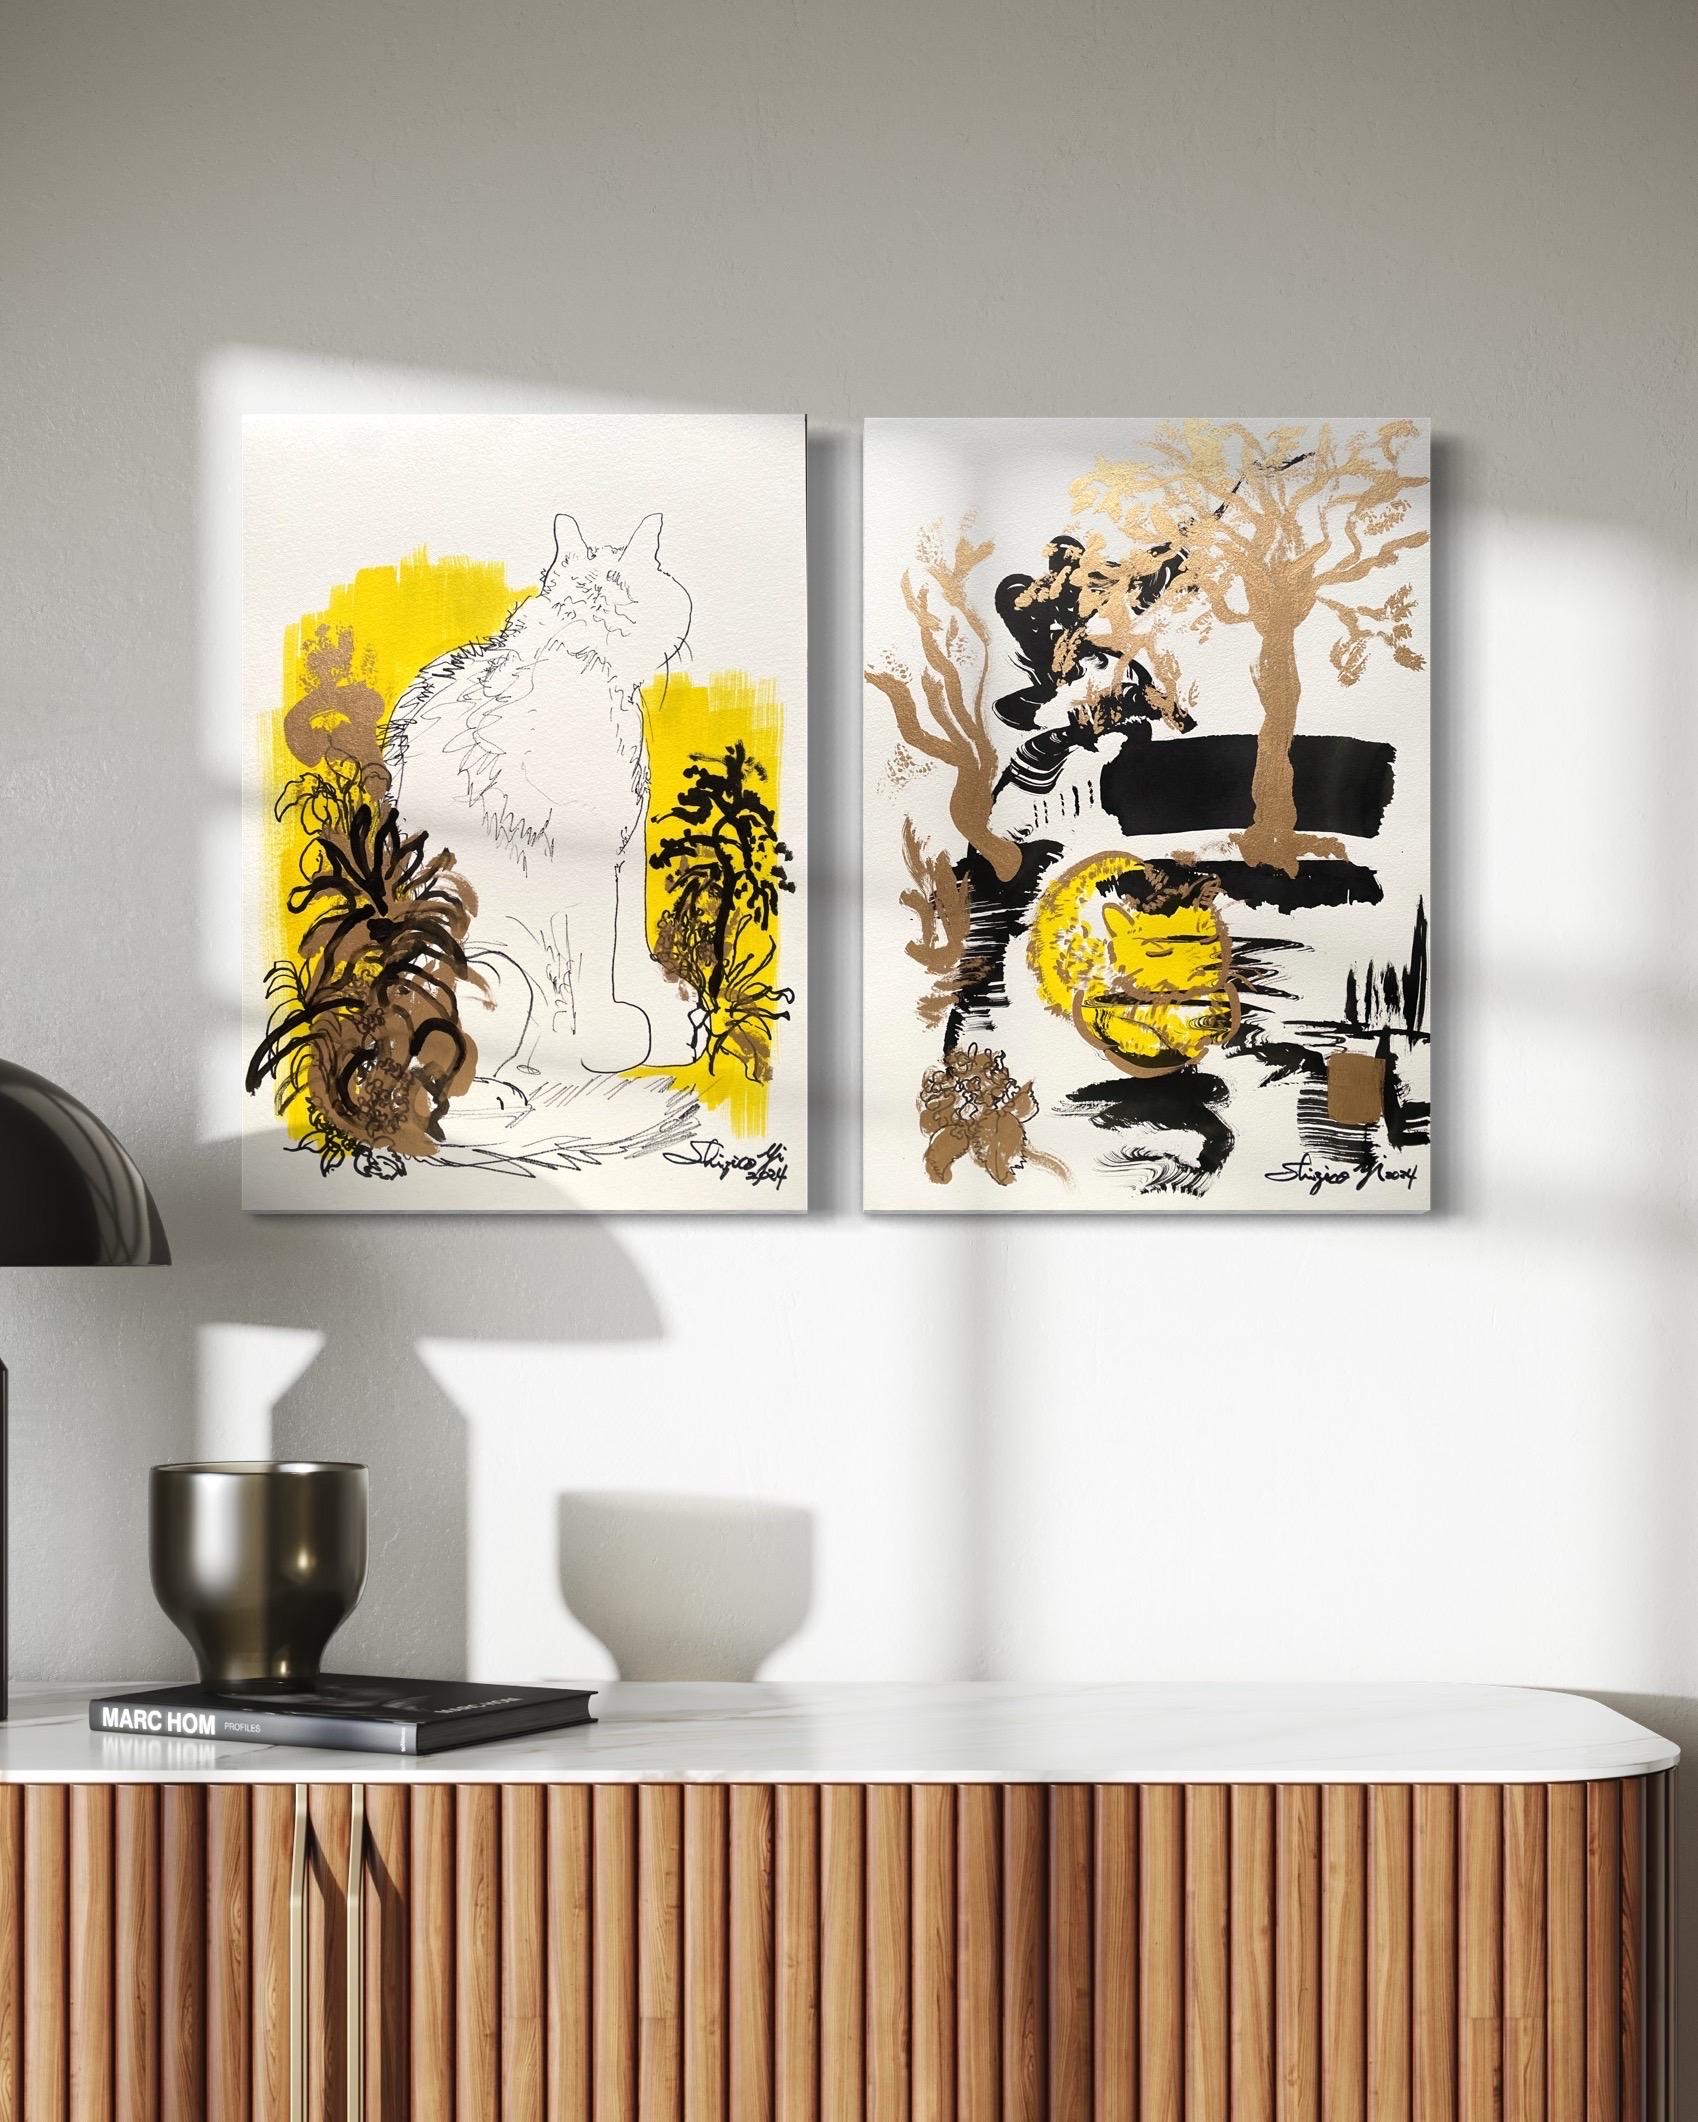 These two drawings as a set, encapsulate the enchanting moments experienced during a series of breakfasts at Shizico Yi's Scotland home. Created plein air and in situ, these scenes unfold over consecutive mornings, with Shizico's cherished cat as